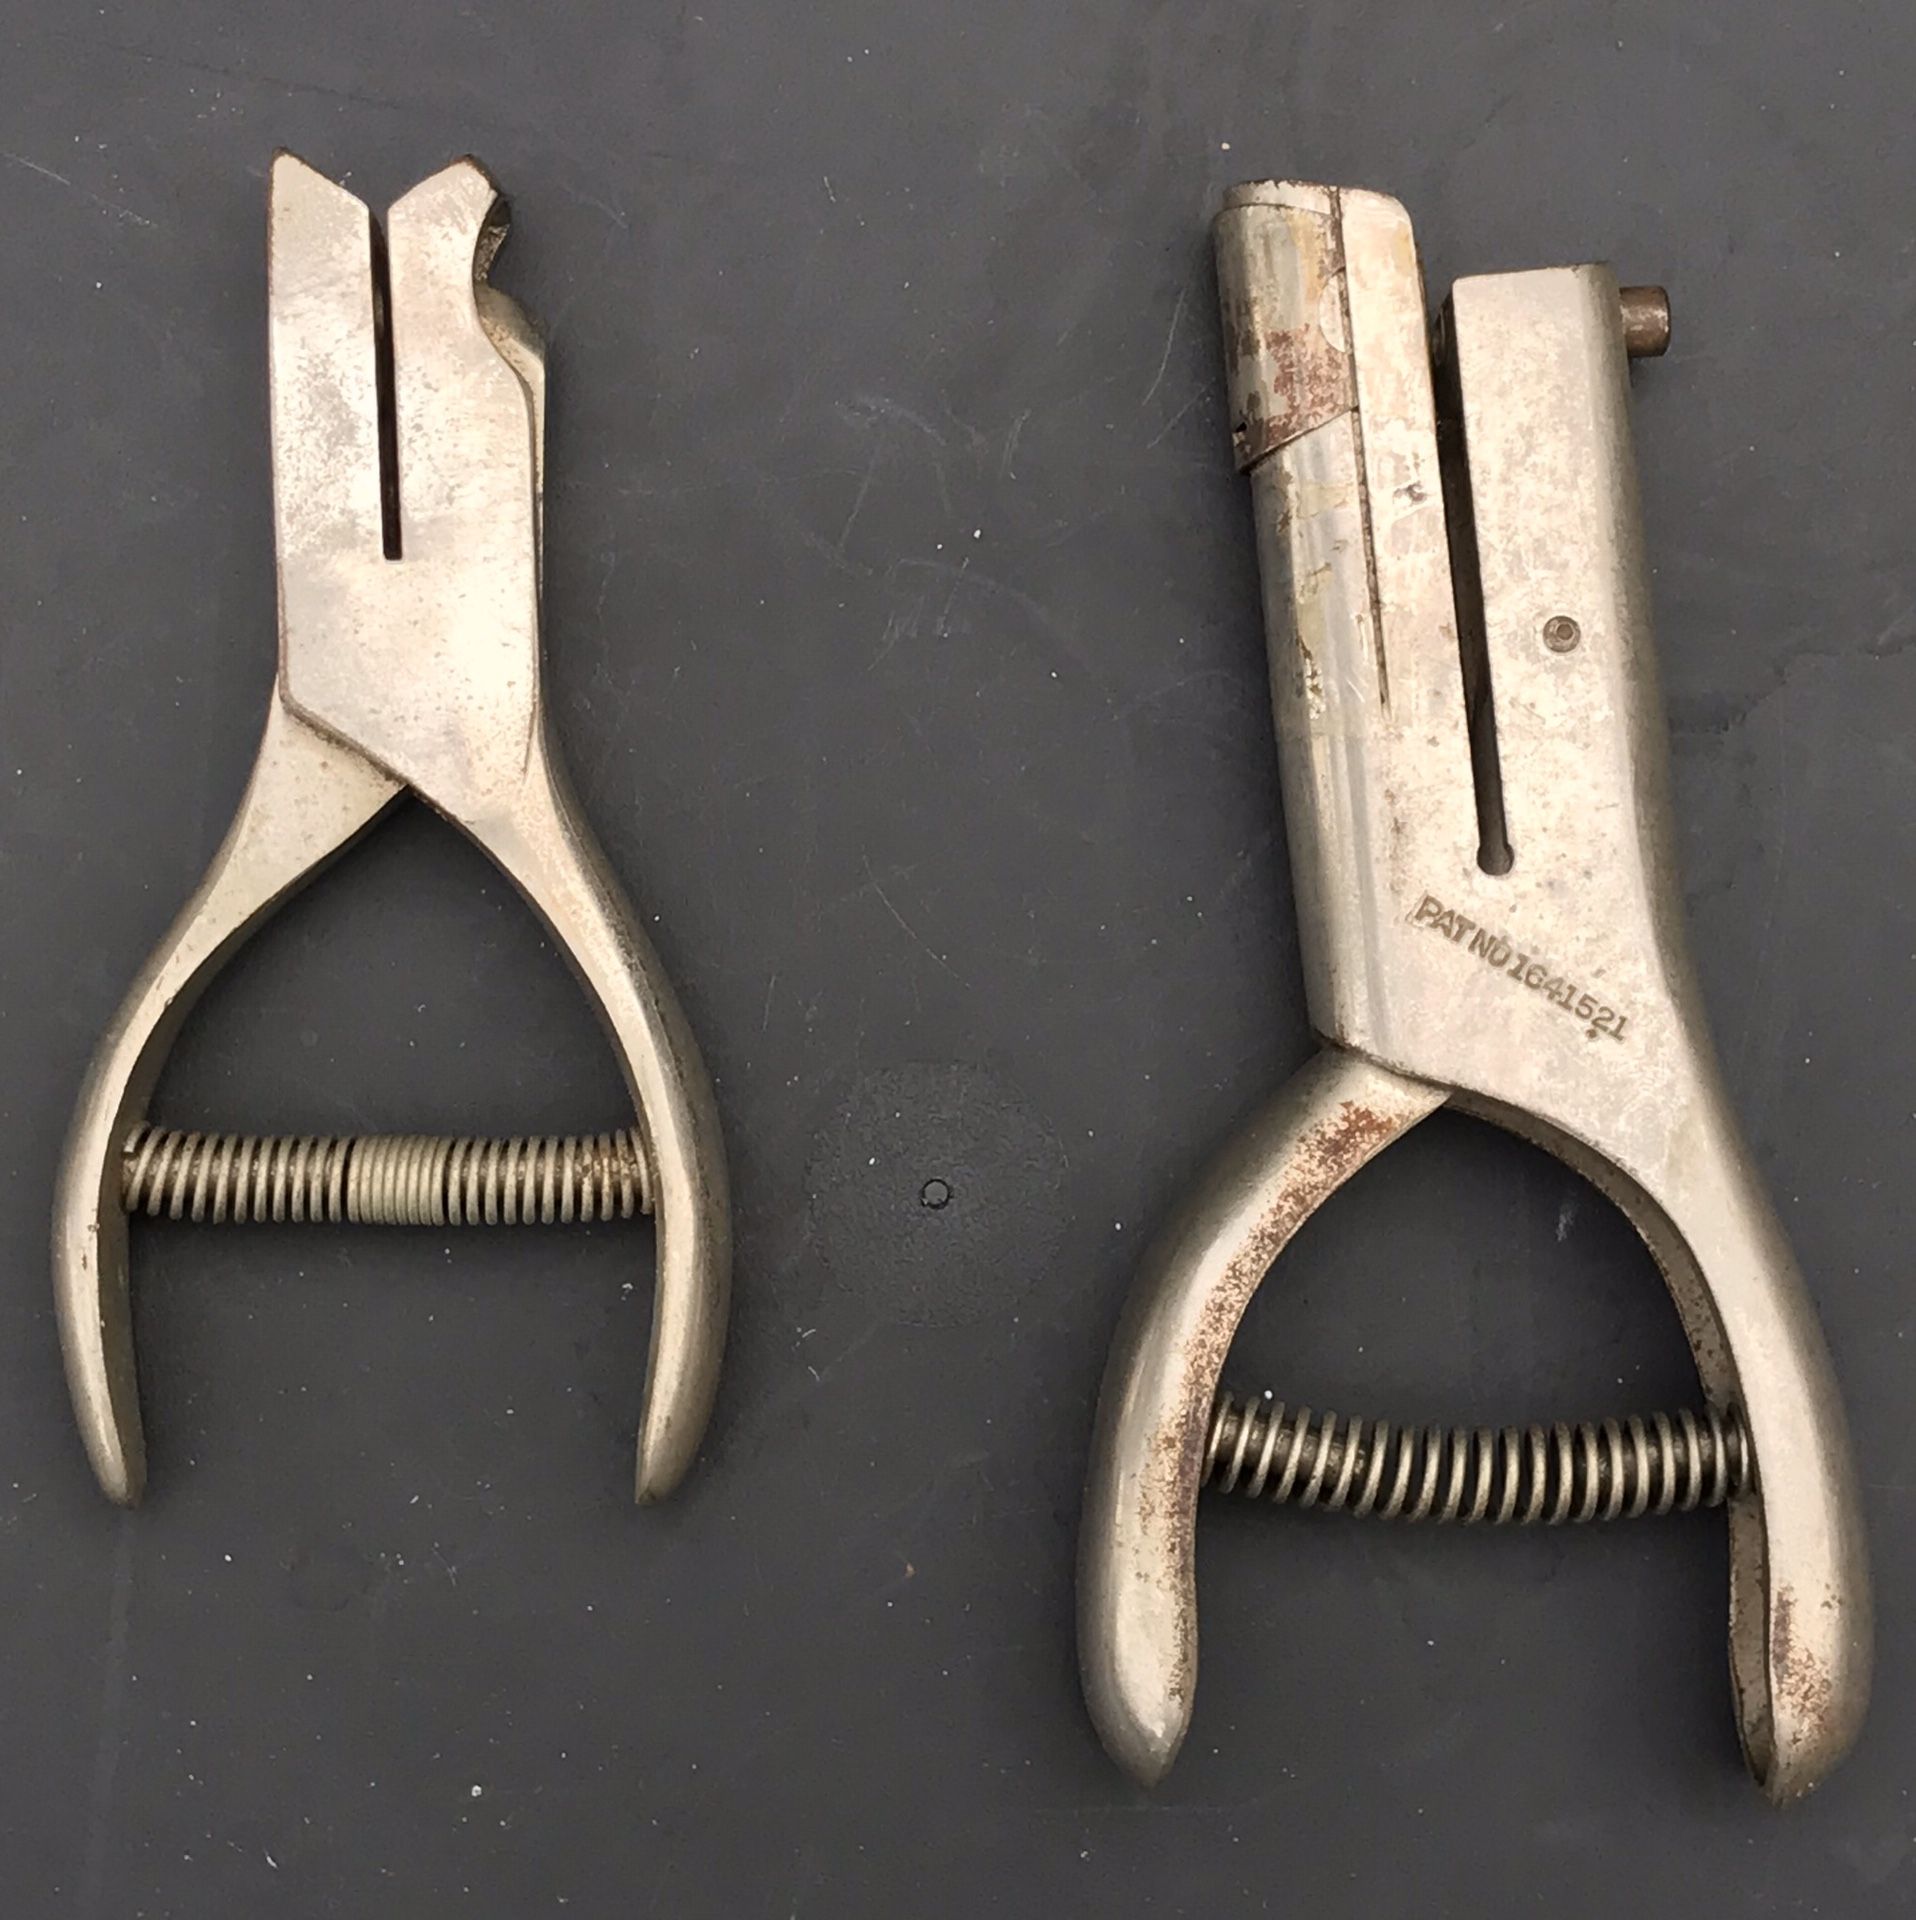 2 VTG‼ McGill Utility Punch - Railroad Conductor Ticket Punch. 5.5” & 5” in length. Price for the pair, hole sizes approximately 5 & 6 mm